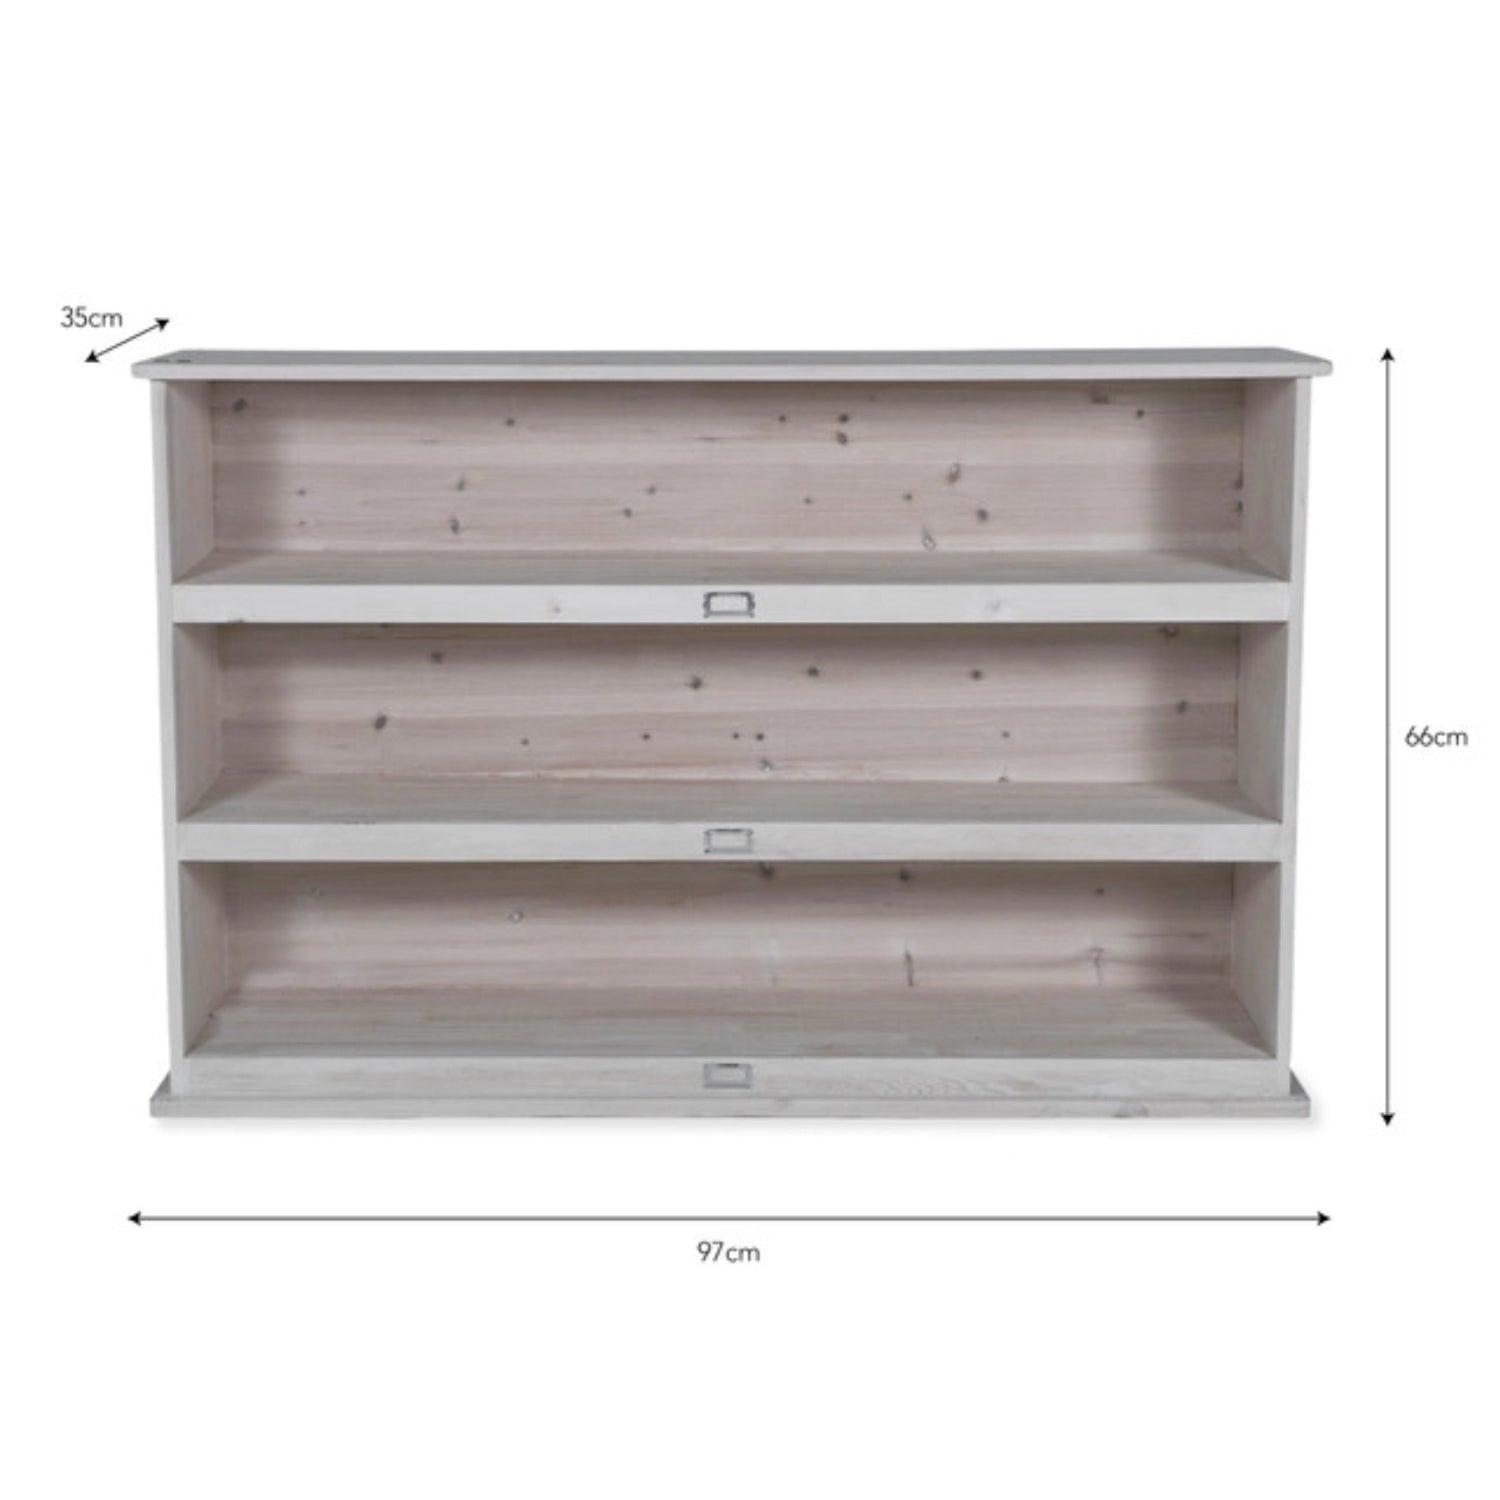 Large Chedworth Shelving by Garden Trading - Spruce